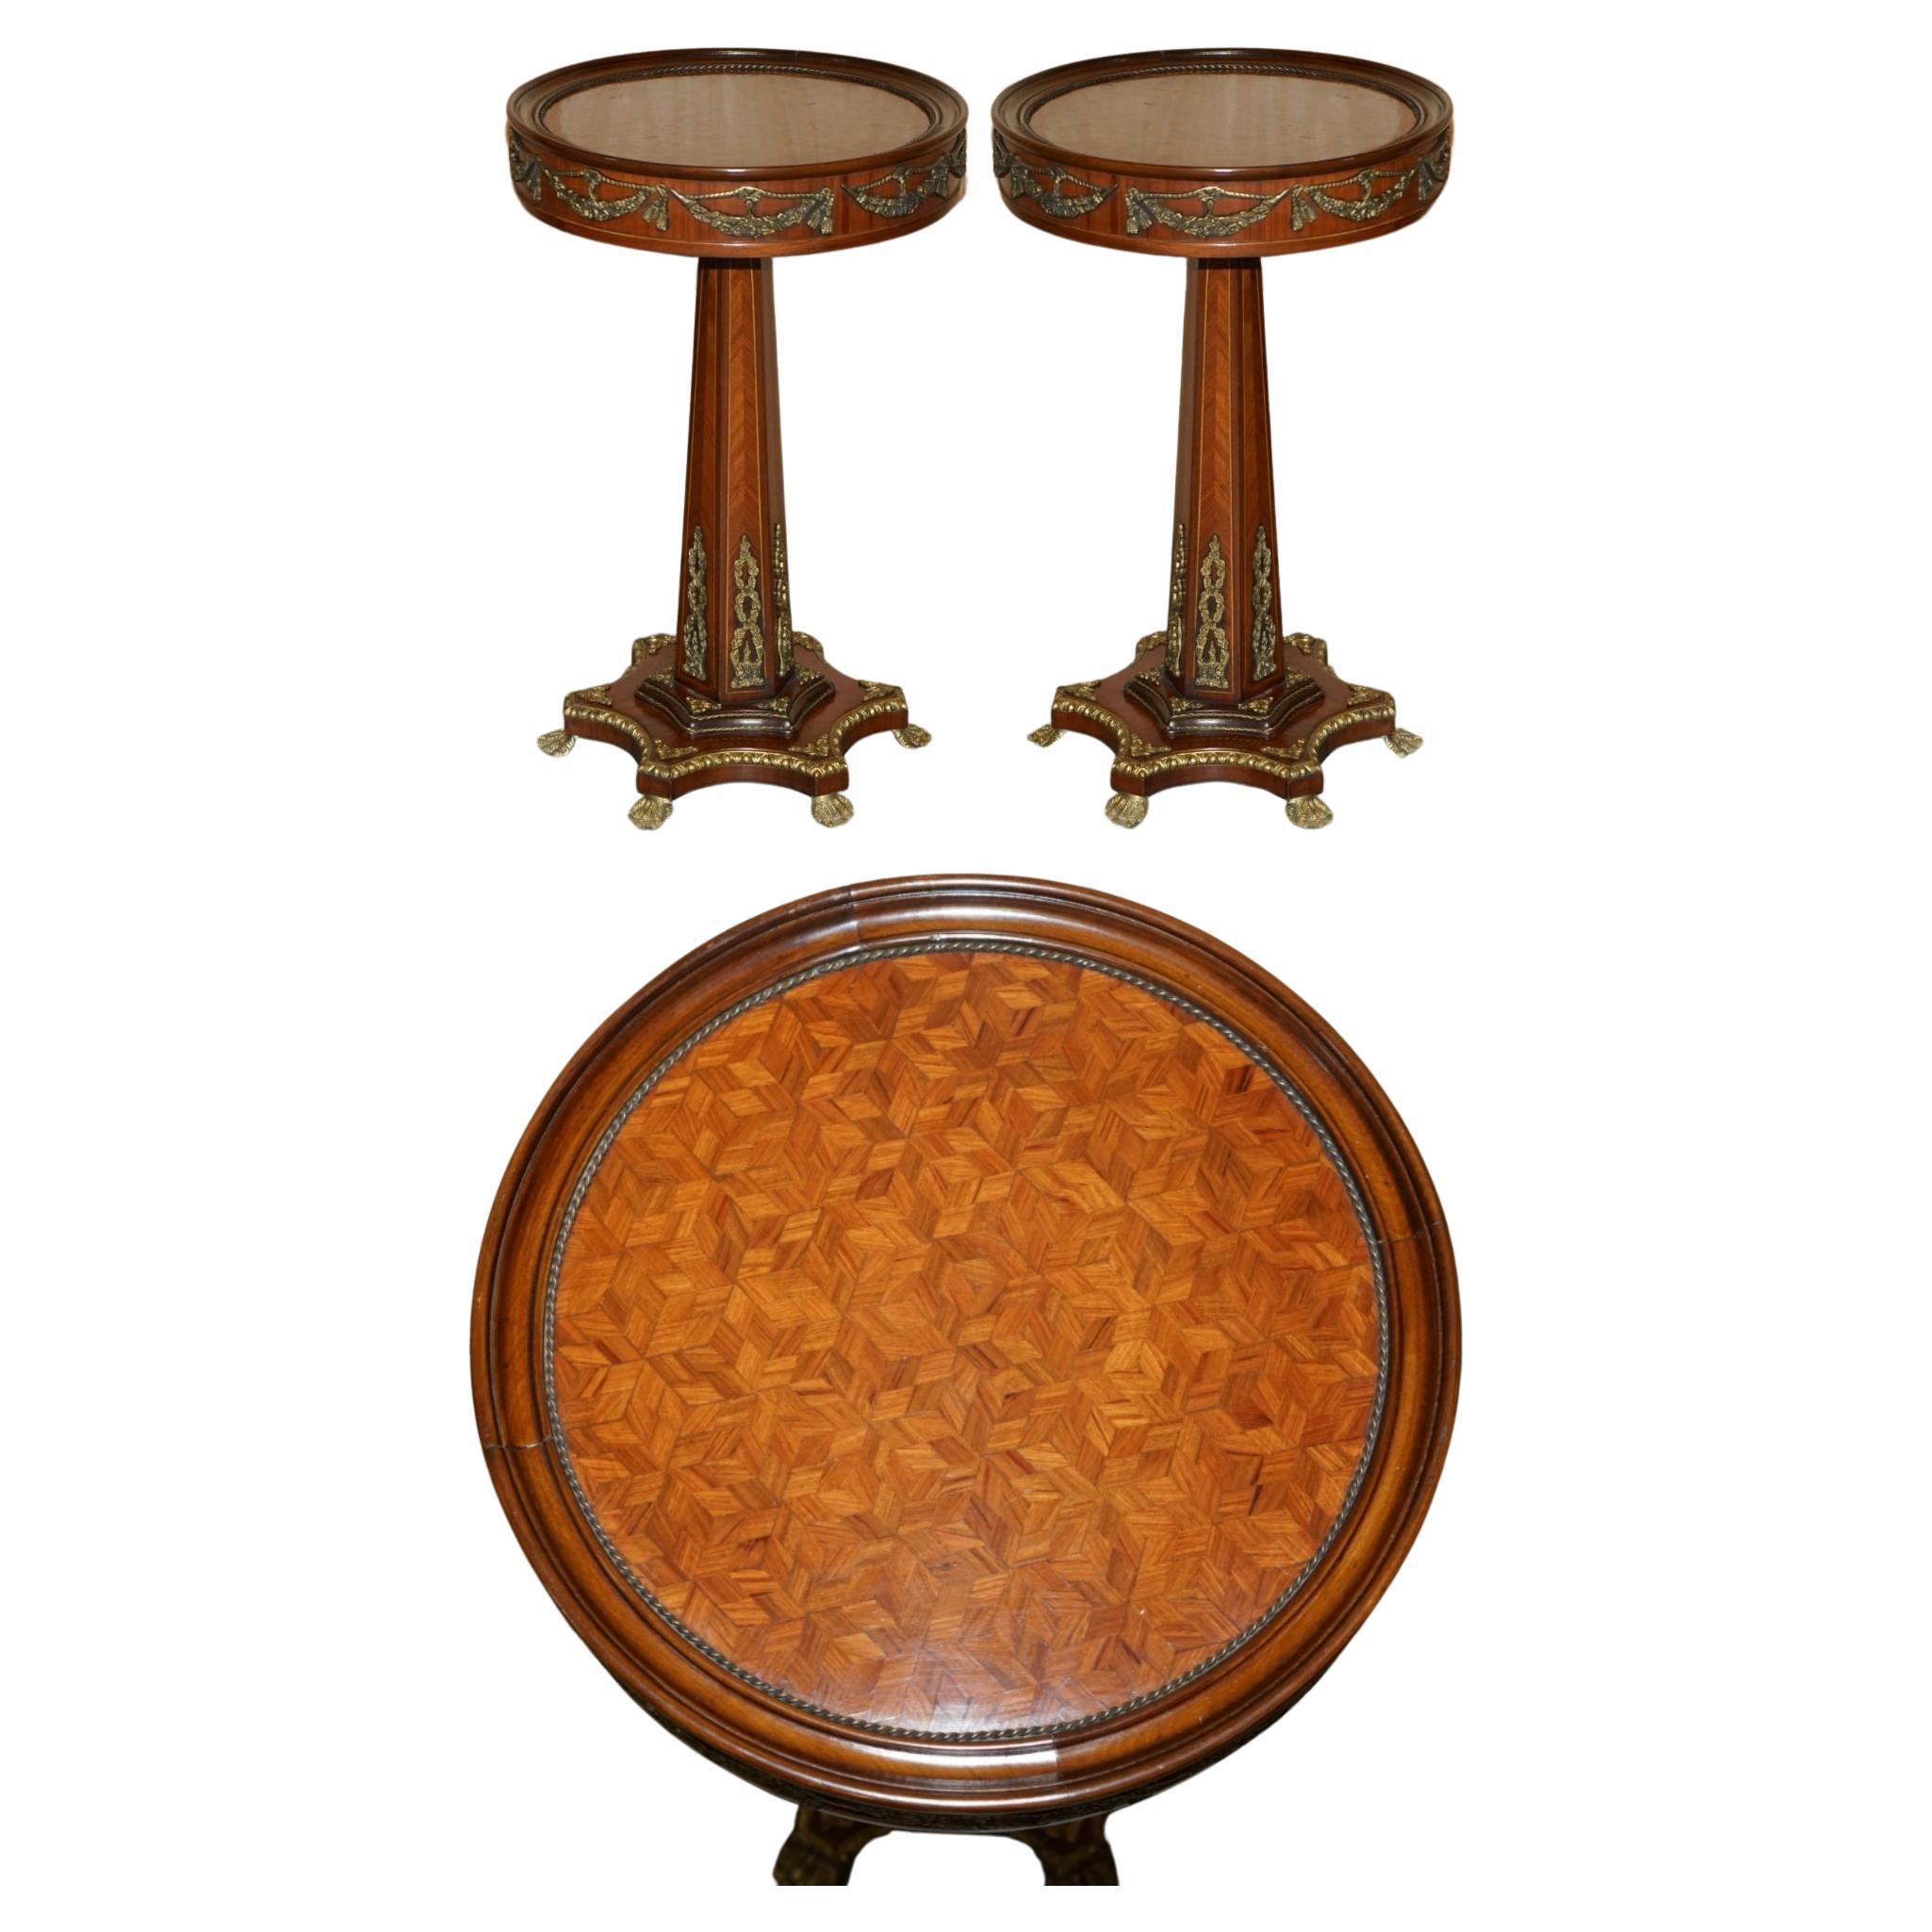 LOVELY PAiR OF FRENCH PARQUETRY WALNUT & GILT BRASS ROUND OCCASIONAL TABLES